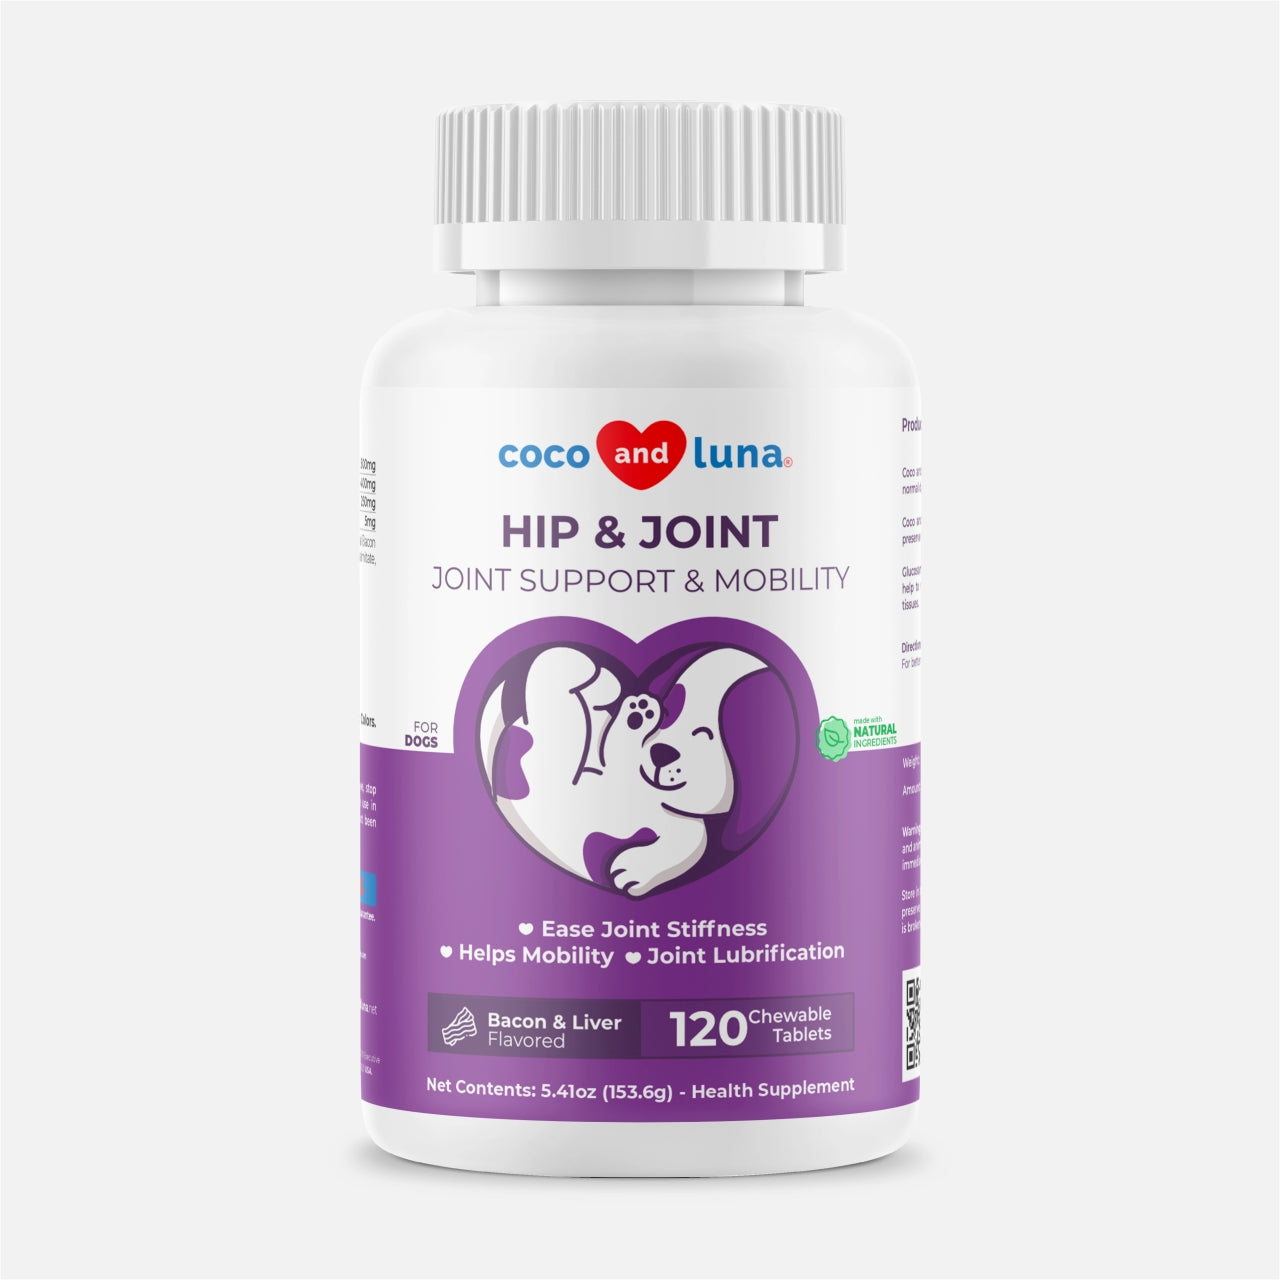 Hip and Joint Support for Dogs - 120 Chewable Tablets - Coco and Luna